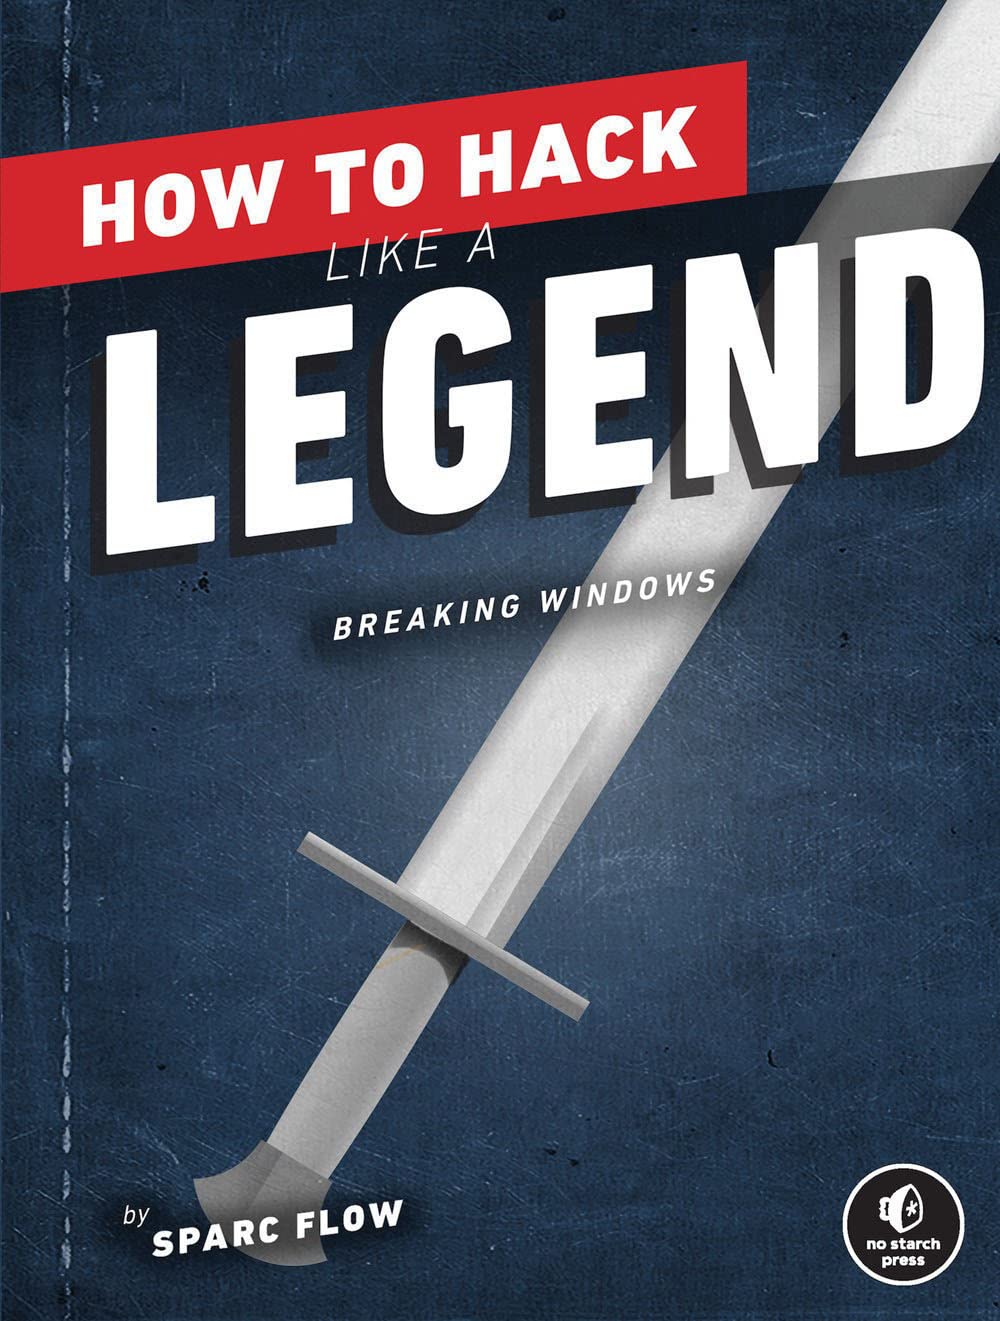 How to Hack Like a Legend: Breaking Windows by Sparc Flow